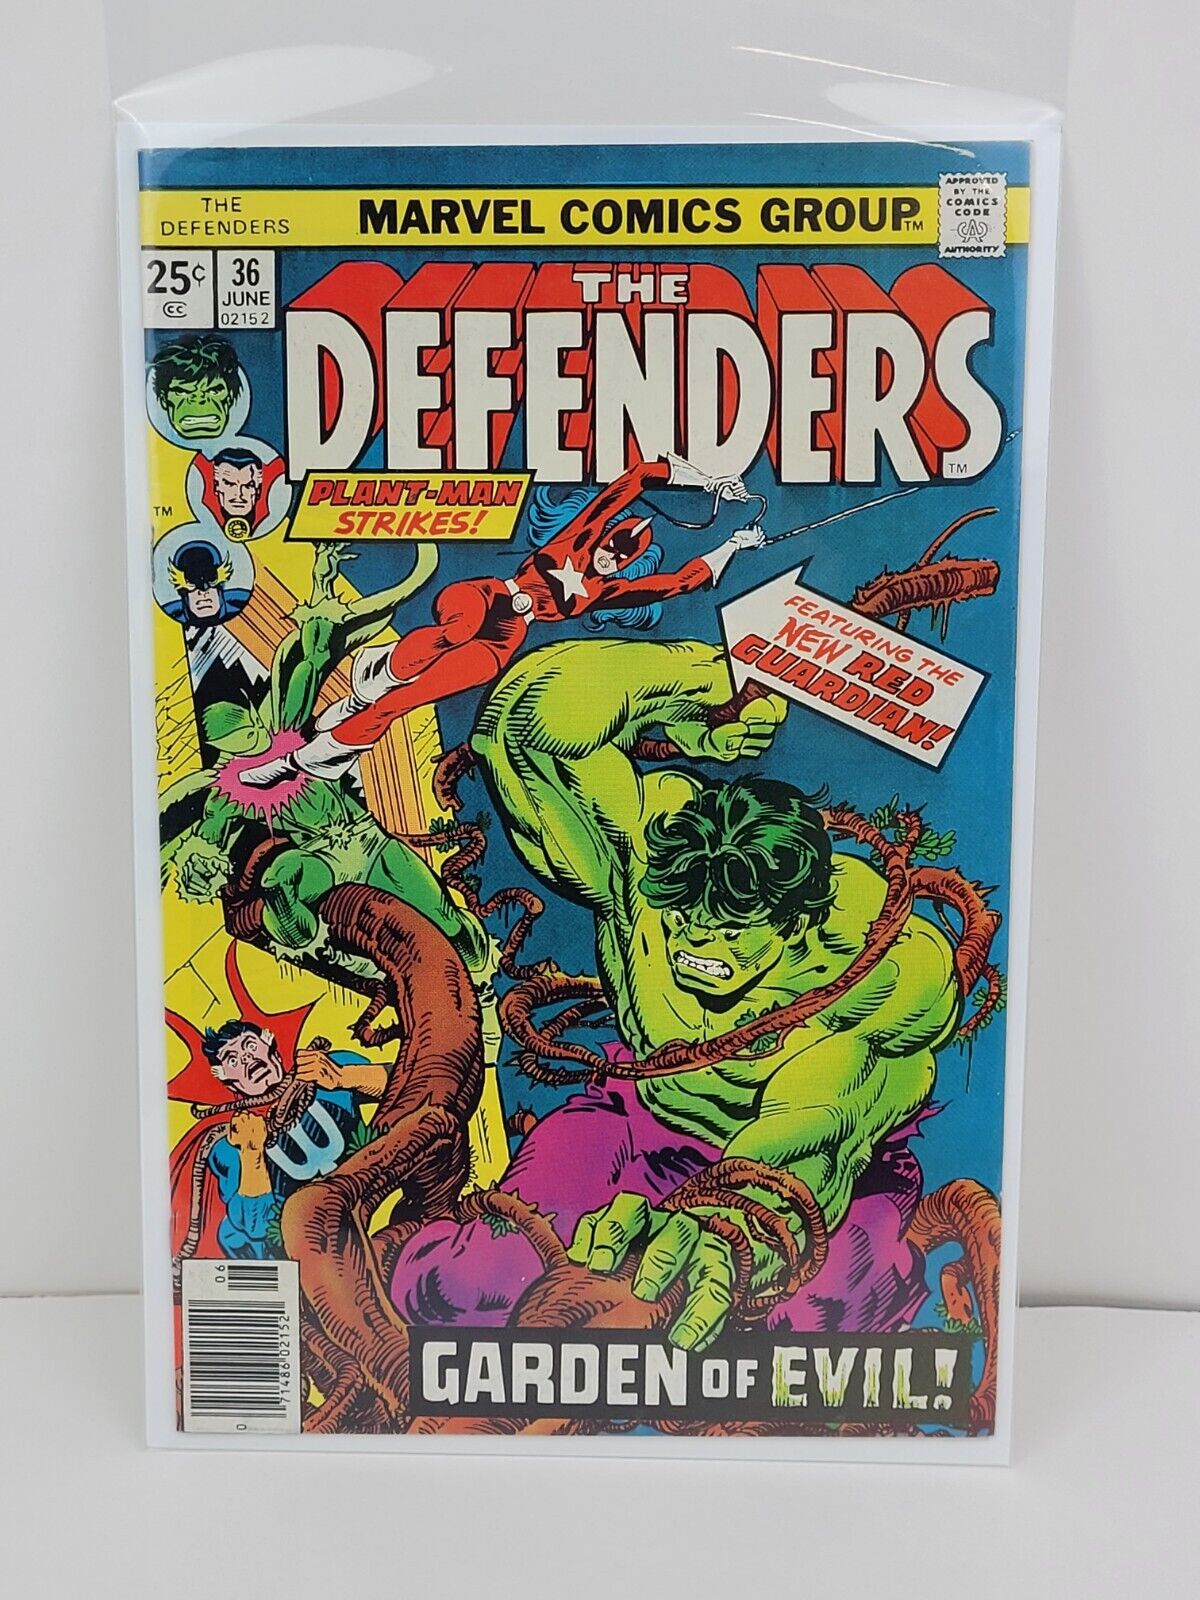 The Defenders #36 New Red Guardian & Plant-man Appearance Marvel Comics 1976